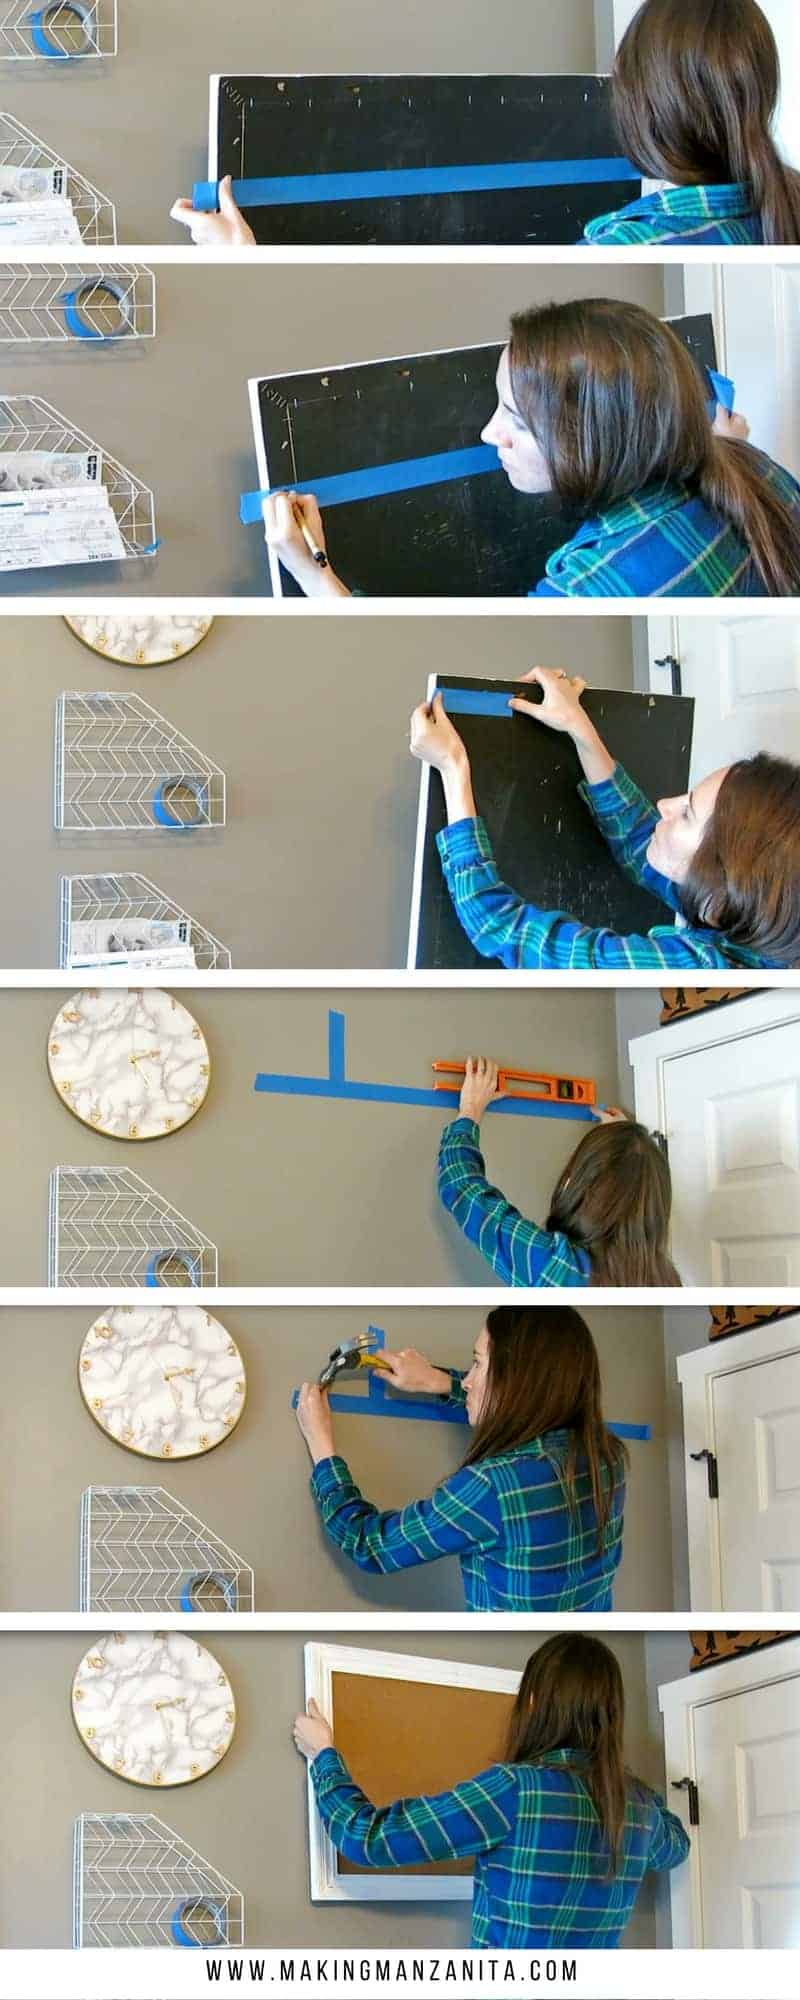 This collage shows all the steps to hang a picture frame easily on the first try - using painters tape to mark keyholes on the picture frame, hammer in nails on the wall, and perfectly hang a picture so it's level.